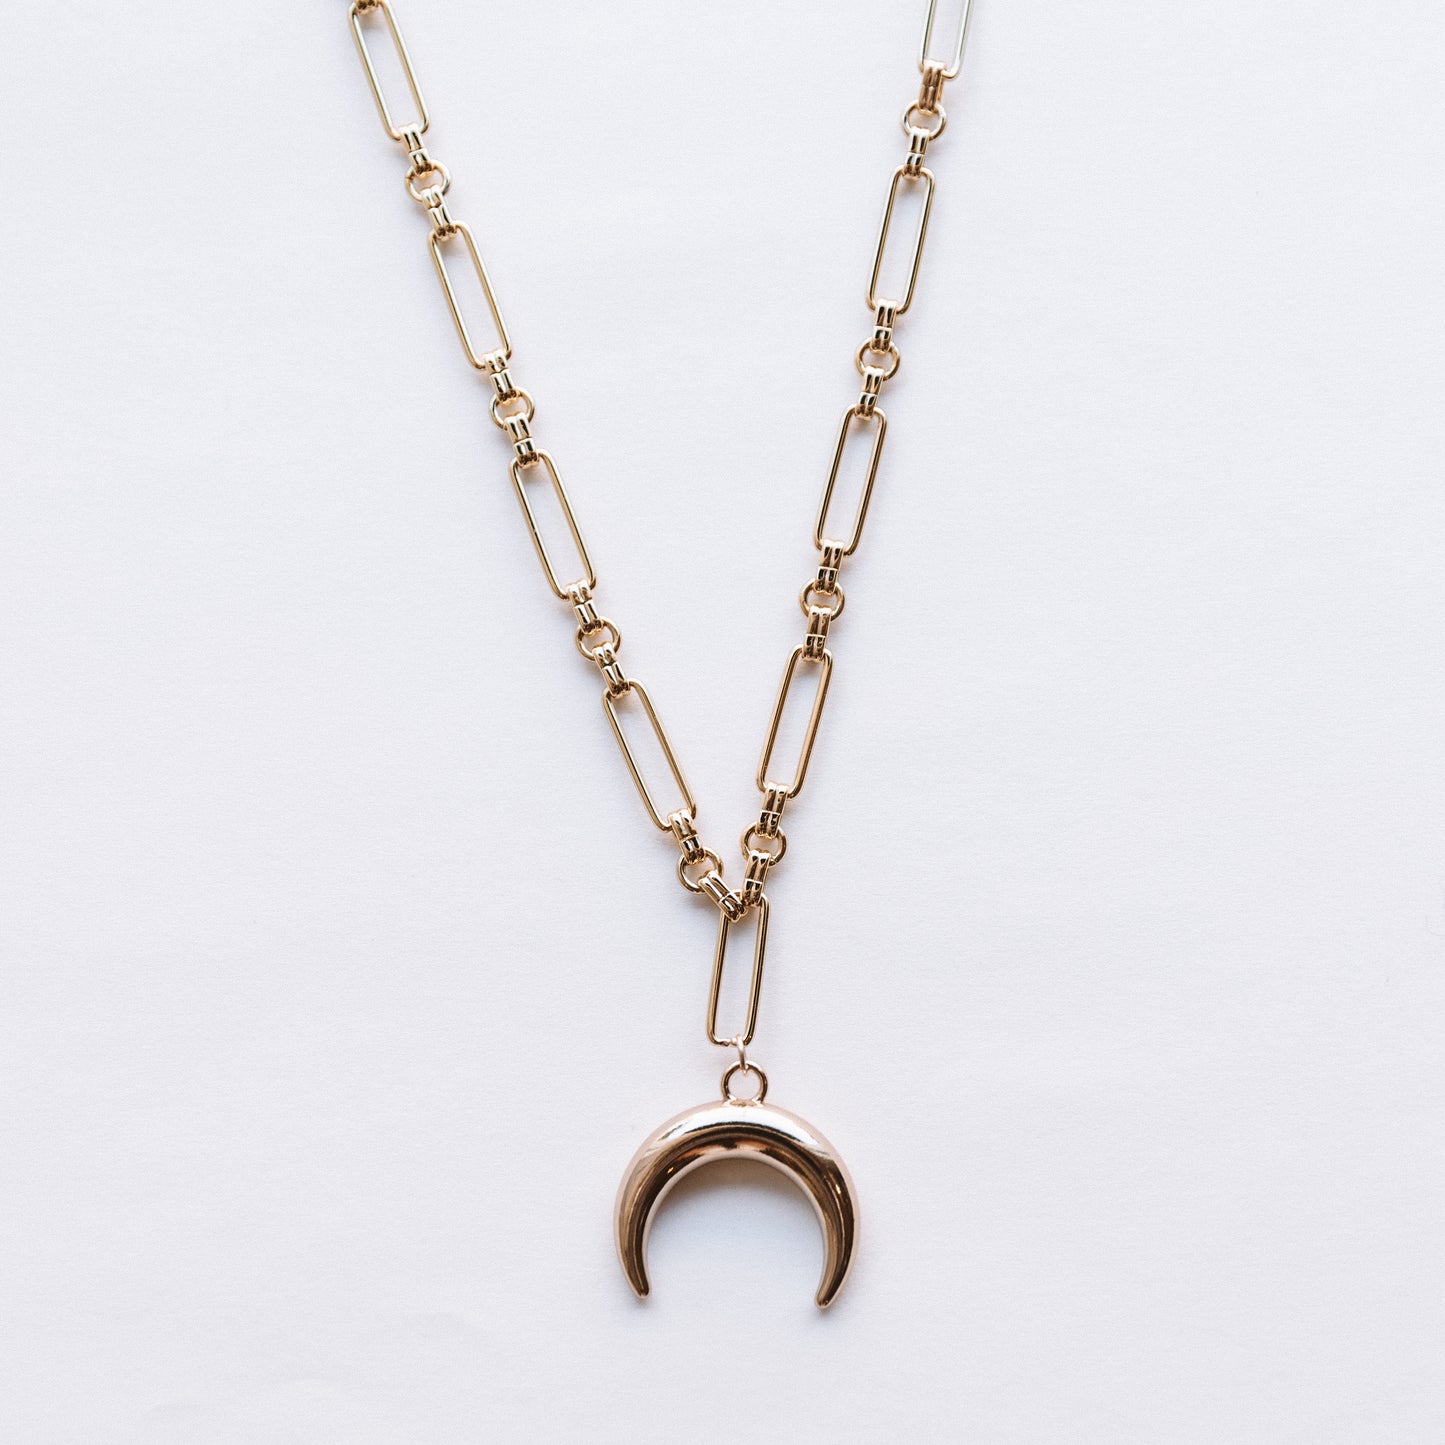 The Festival Horn Necklace